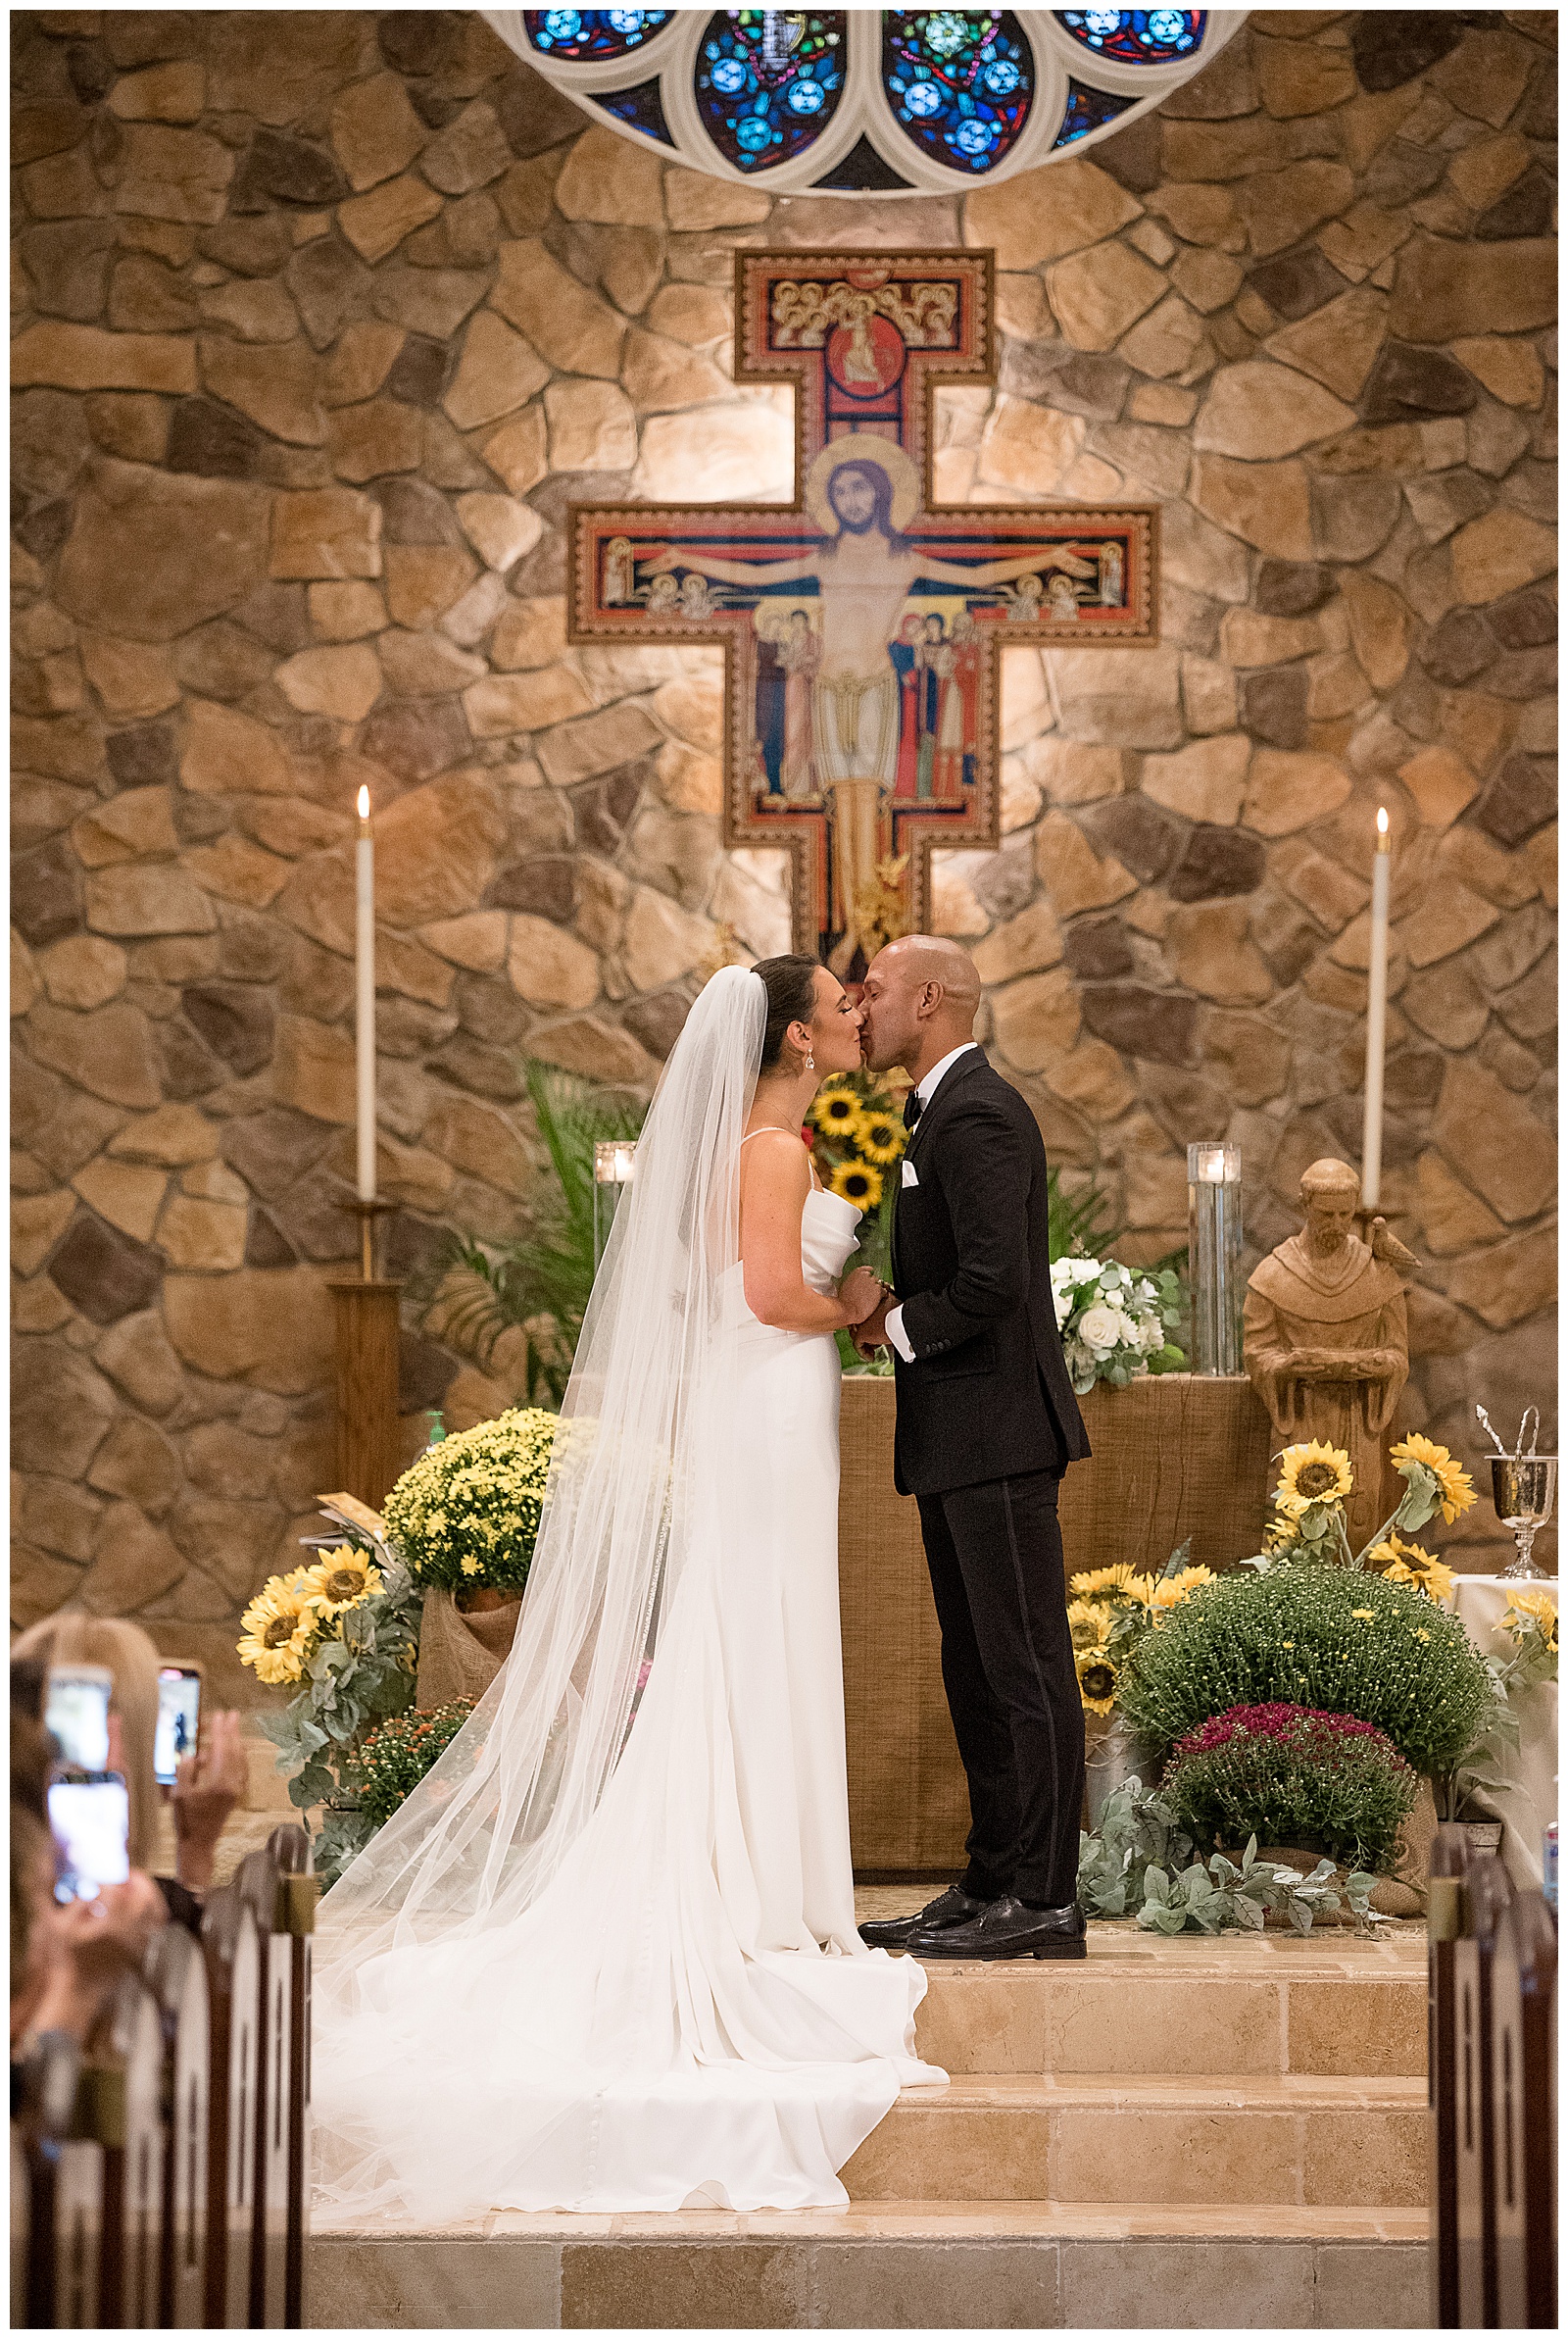 bride and groom kissing during wedding ceremony inside catholic church with beautiful cross and stone wall behind them in new jersey